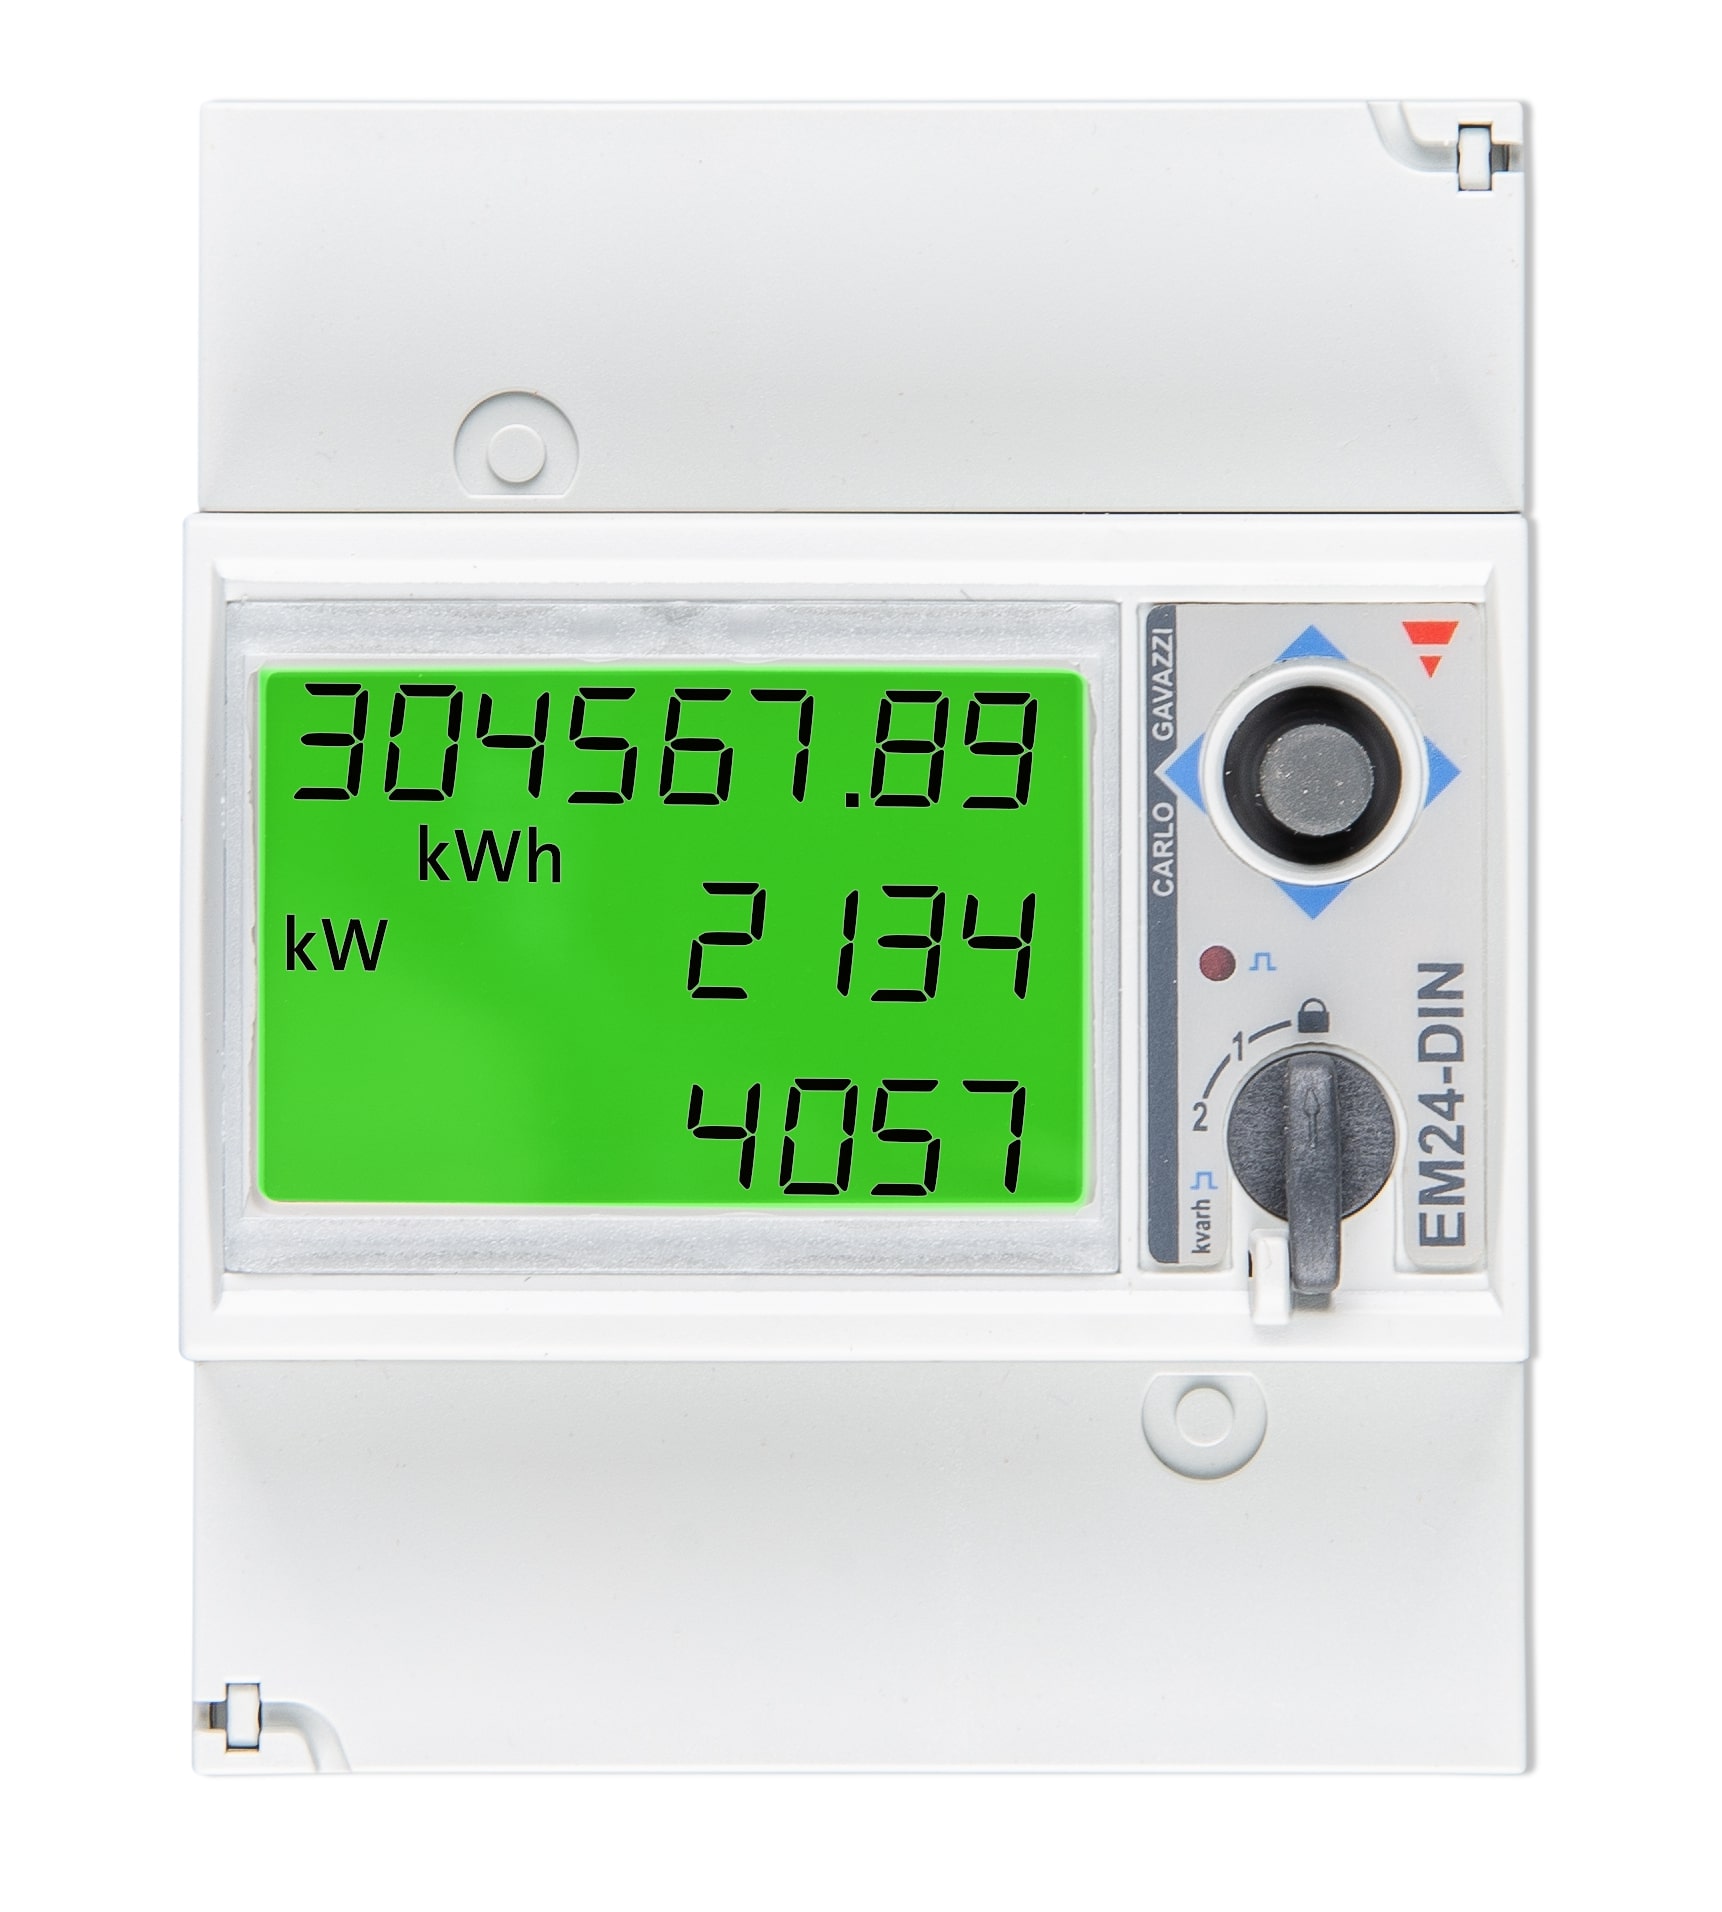 Foto: Energy meter EM24 3phase max 65A/phase (c) Schrack